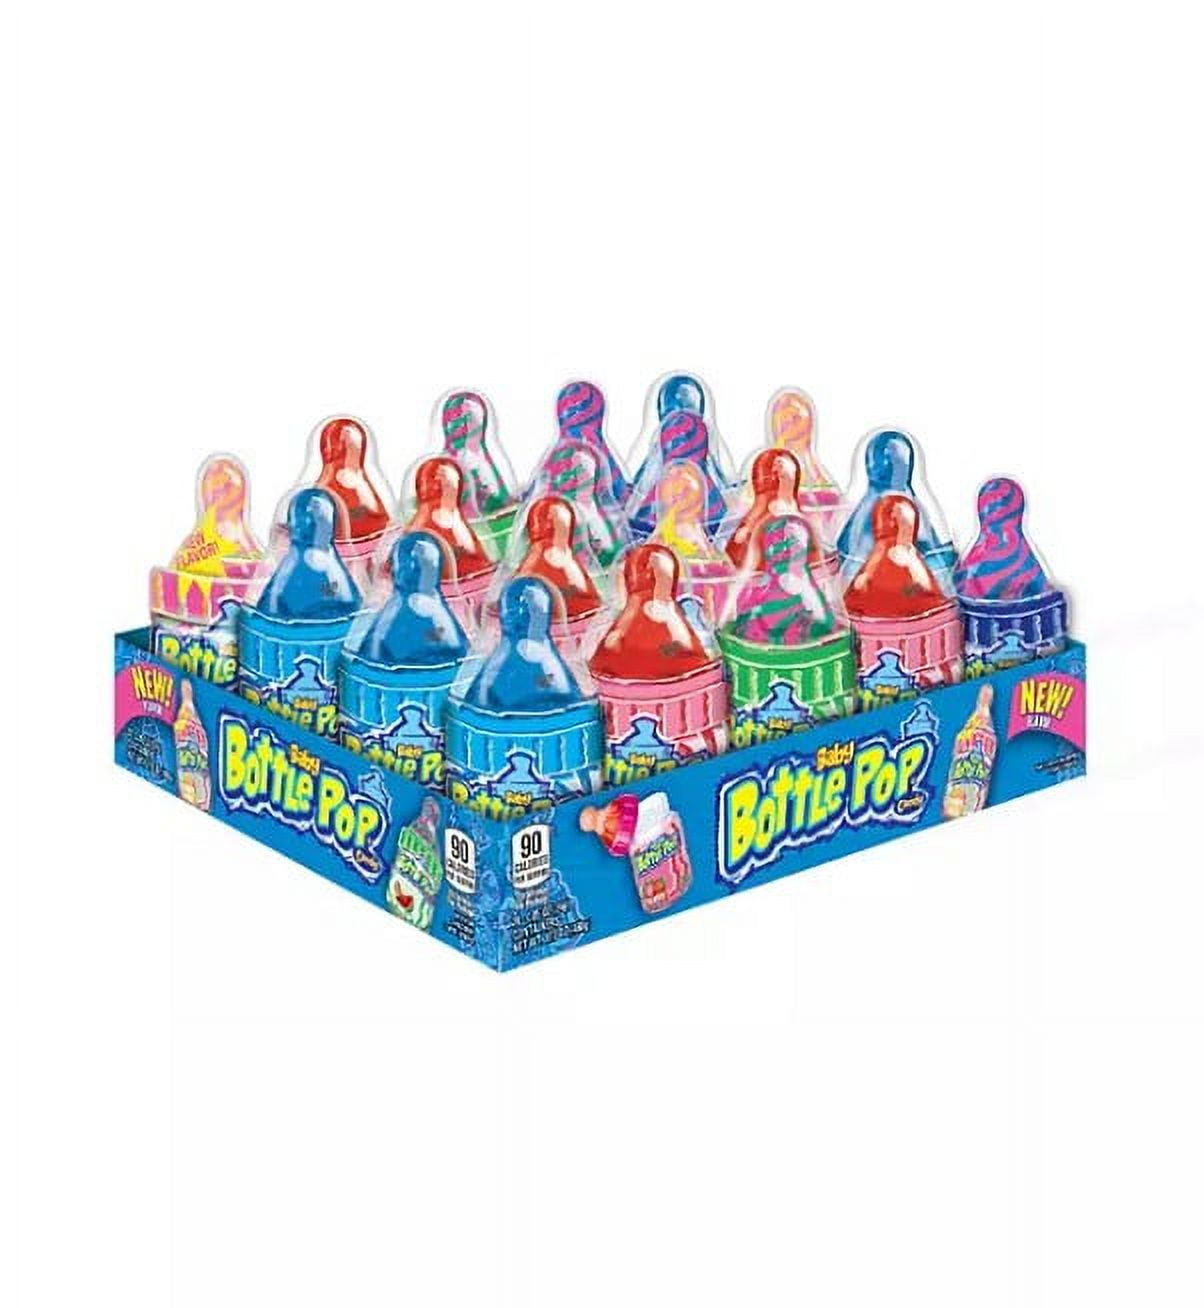 Baby Bottle Pop Christmas 20 Count